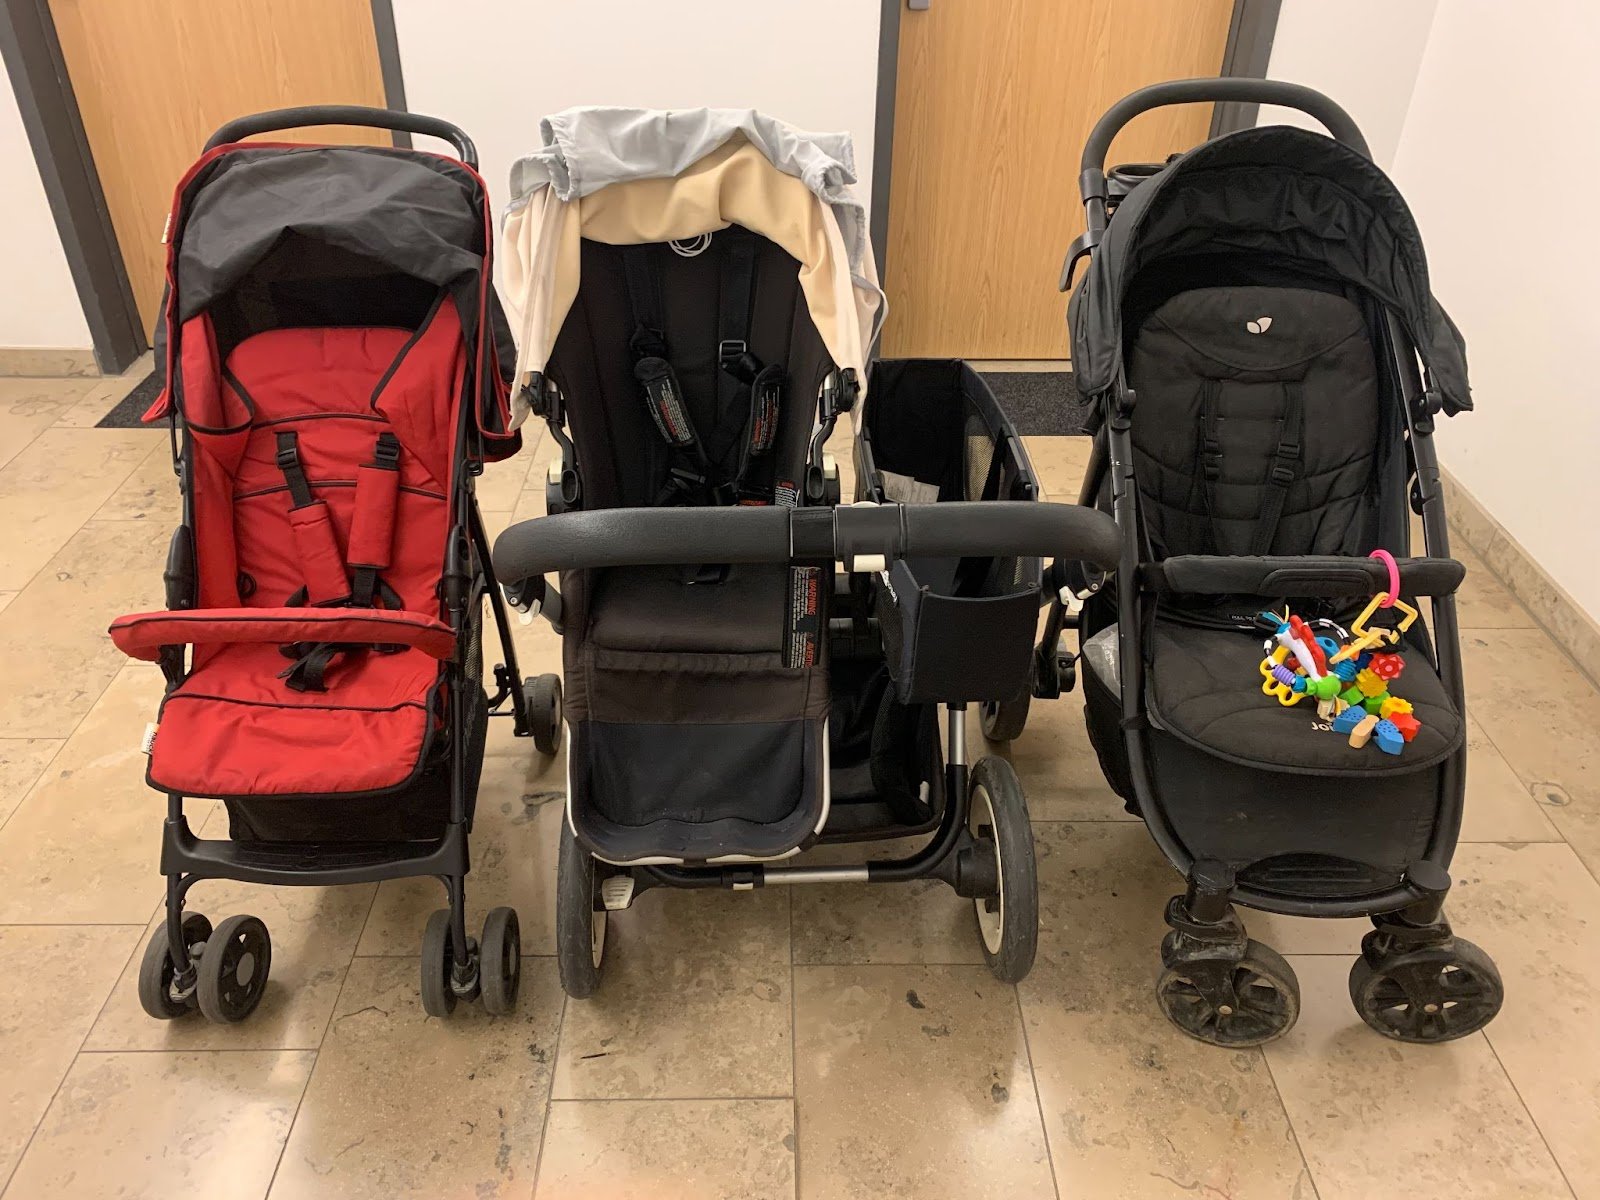 High-End Stroller vs Affordable Stroller: Are Expensive Strollers Worth It?